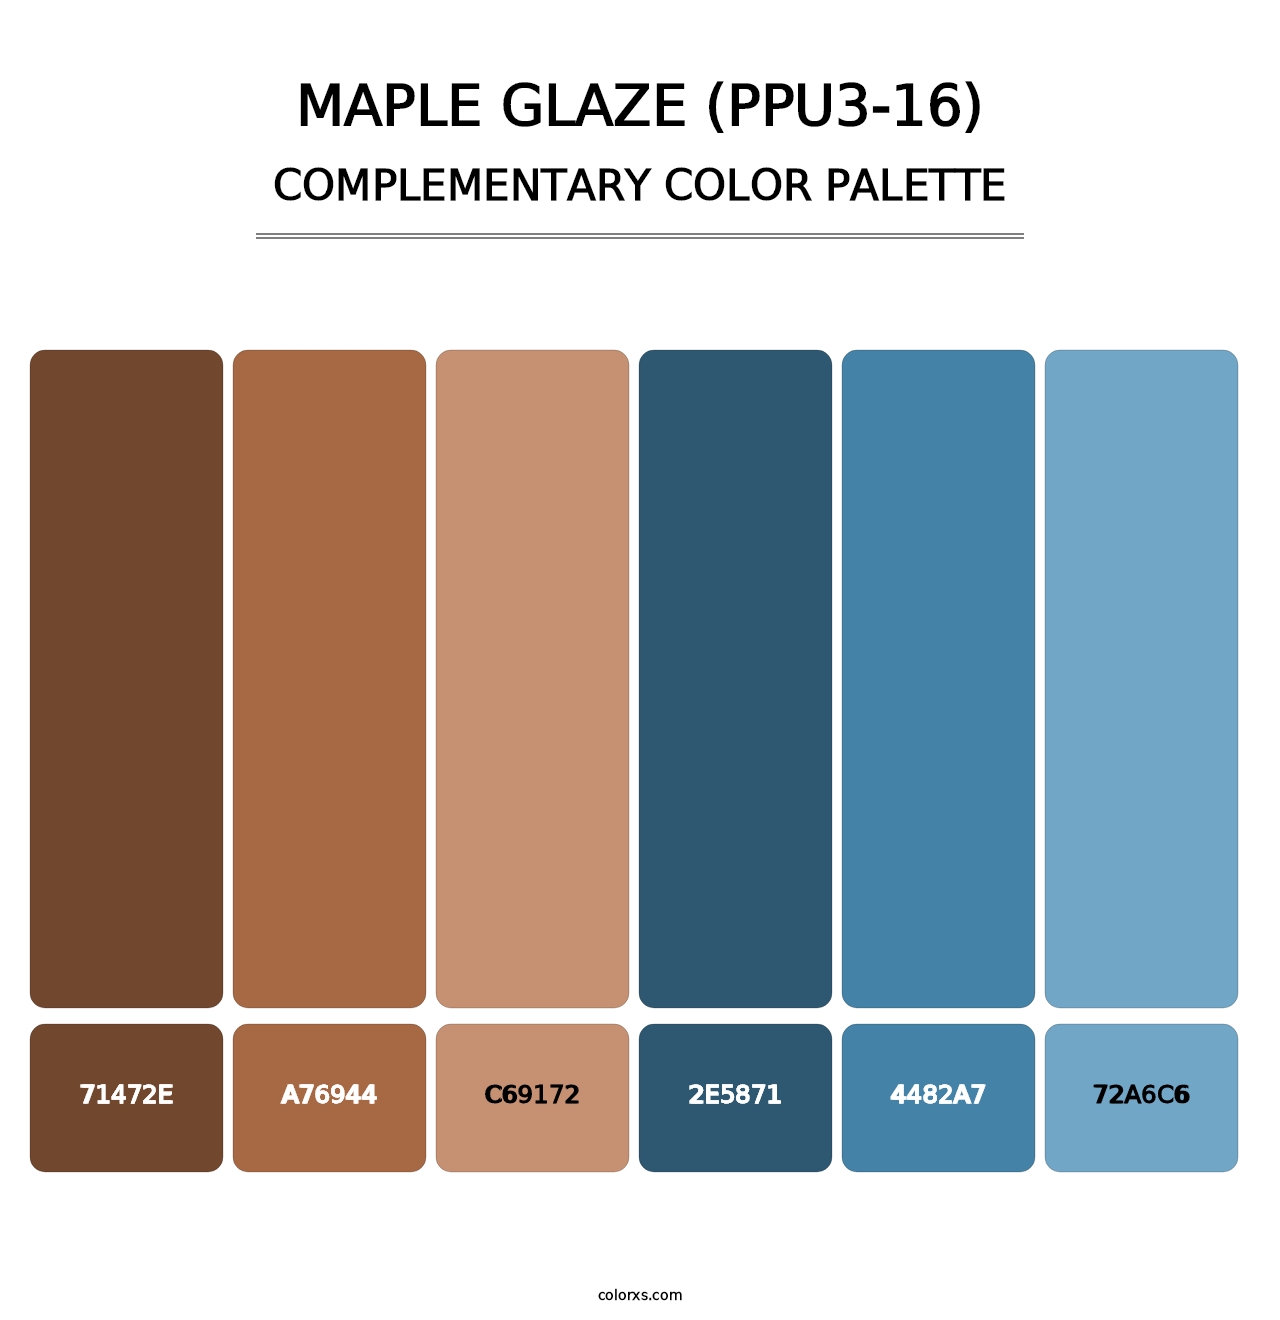 Maple Glaze (PPU3-16) - Complementary Color Palette